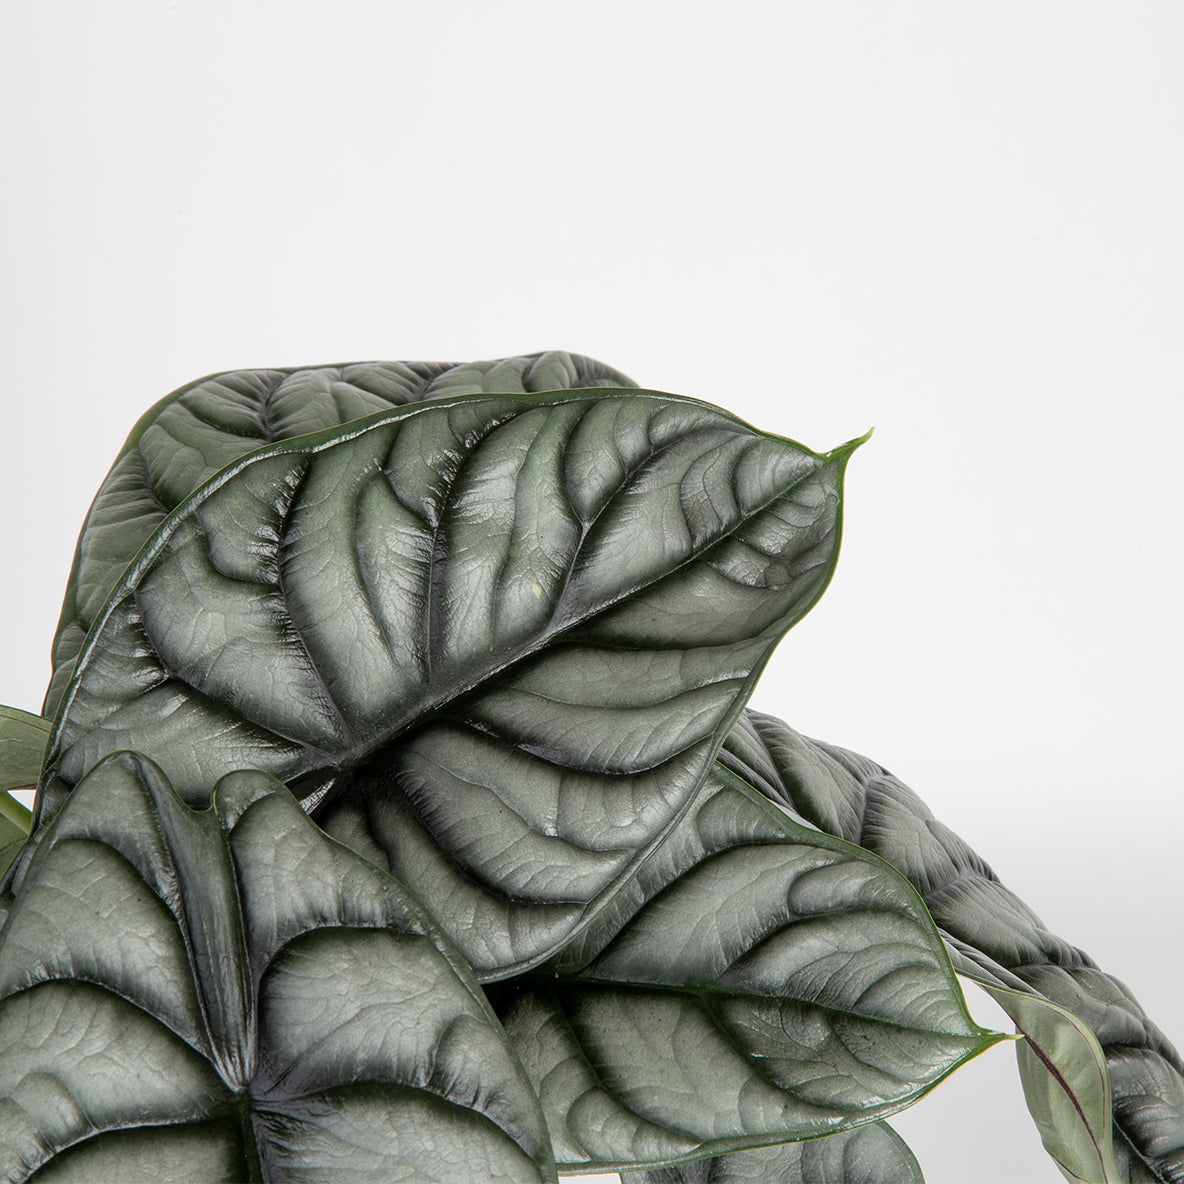 detail close up of alocasia silver dragon leaves. the deep dark green veins are ridges are very pronounced and striking here and the leaves are a muted sage color